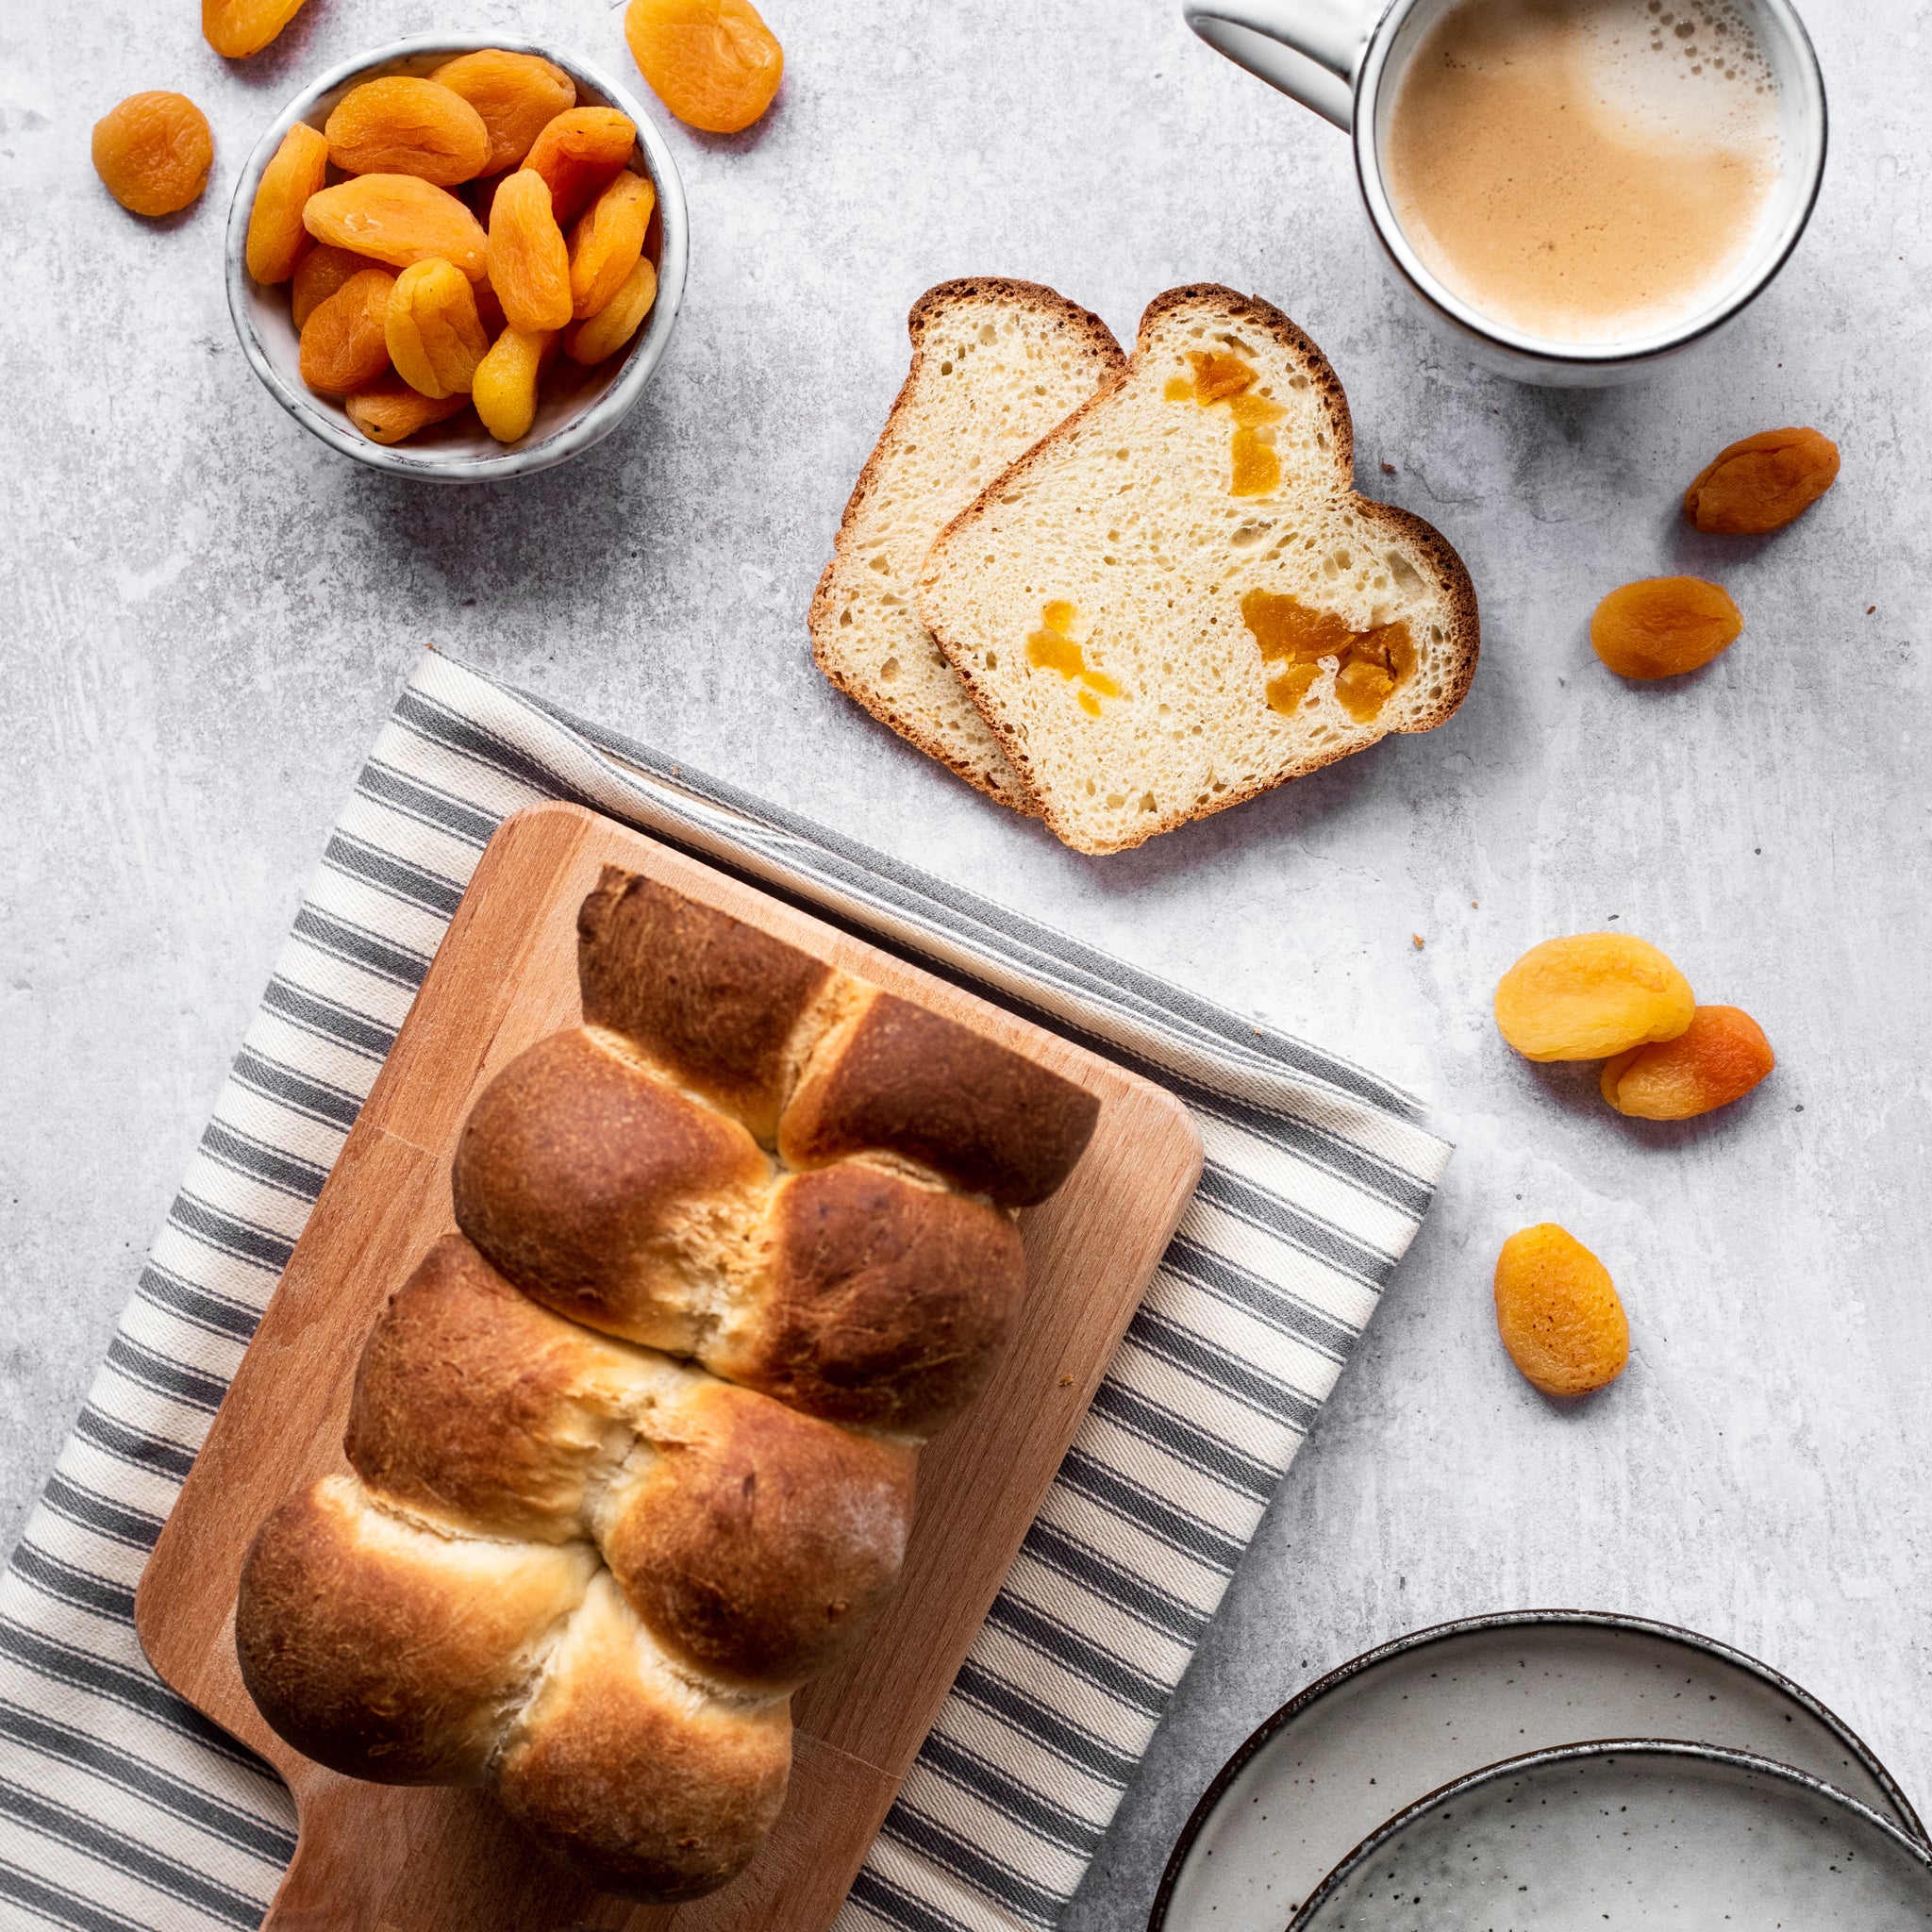 Overhead shot of brioche loaf with two slices cut in front, cup of tea and pot of apricots